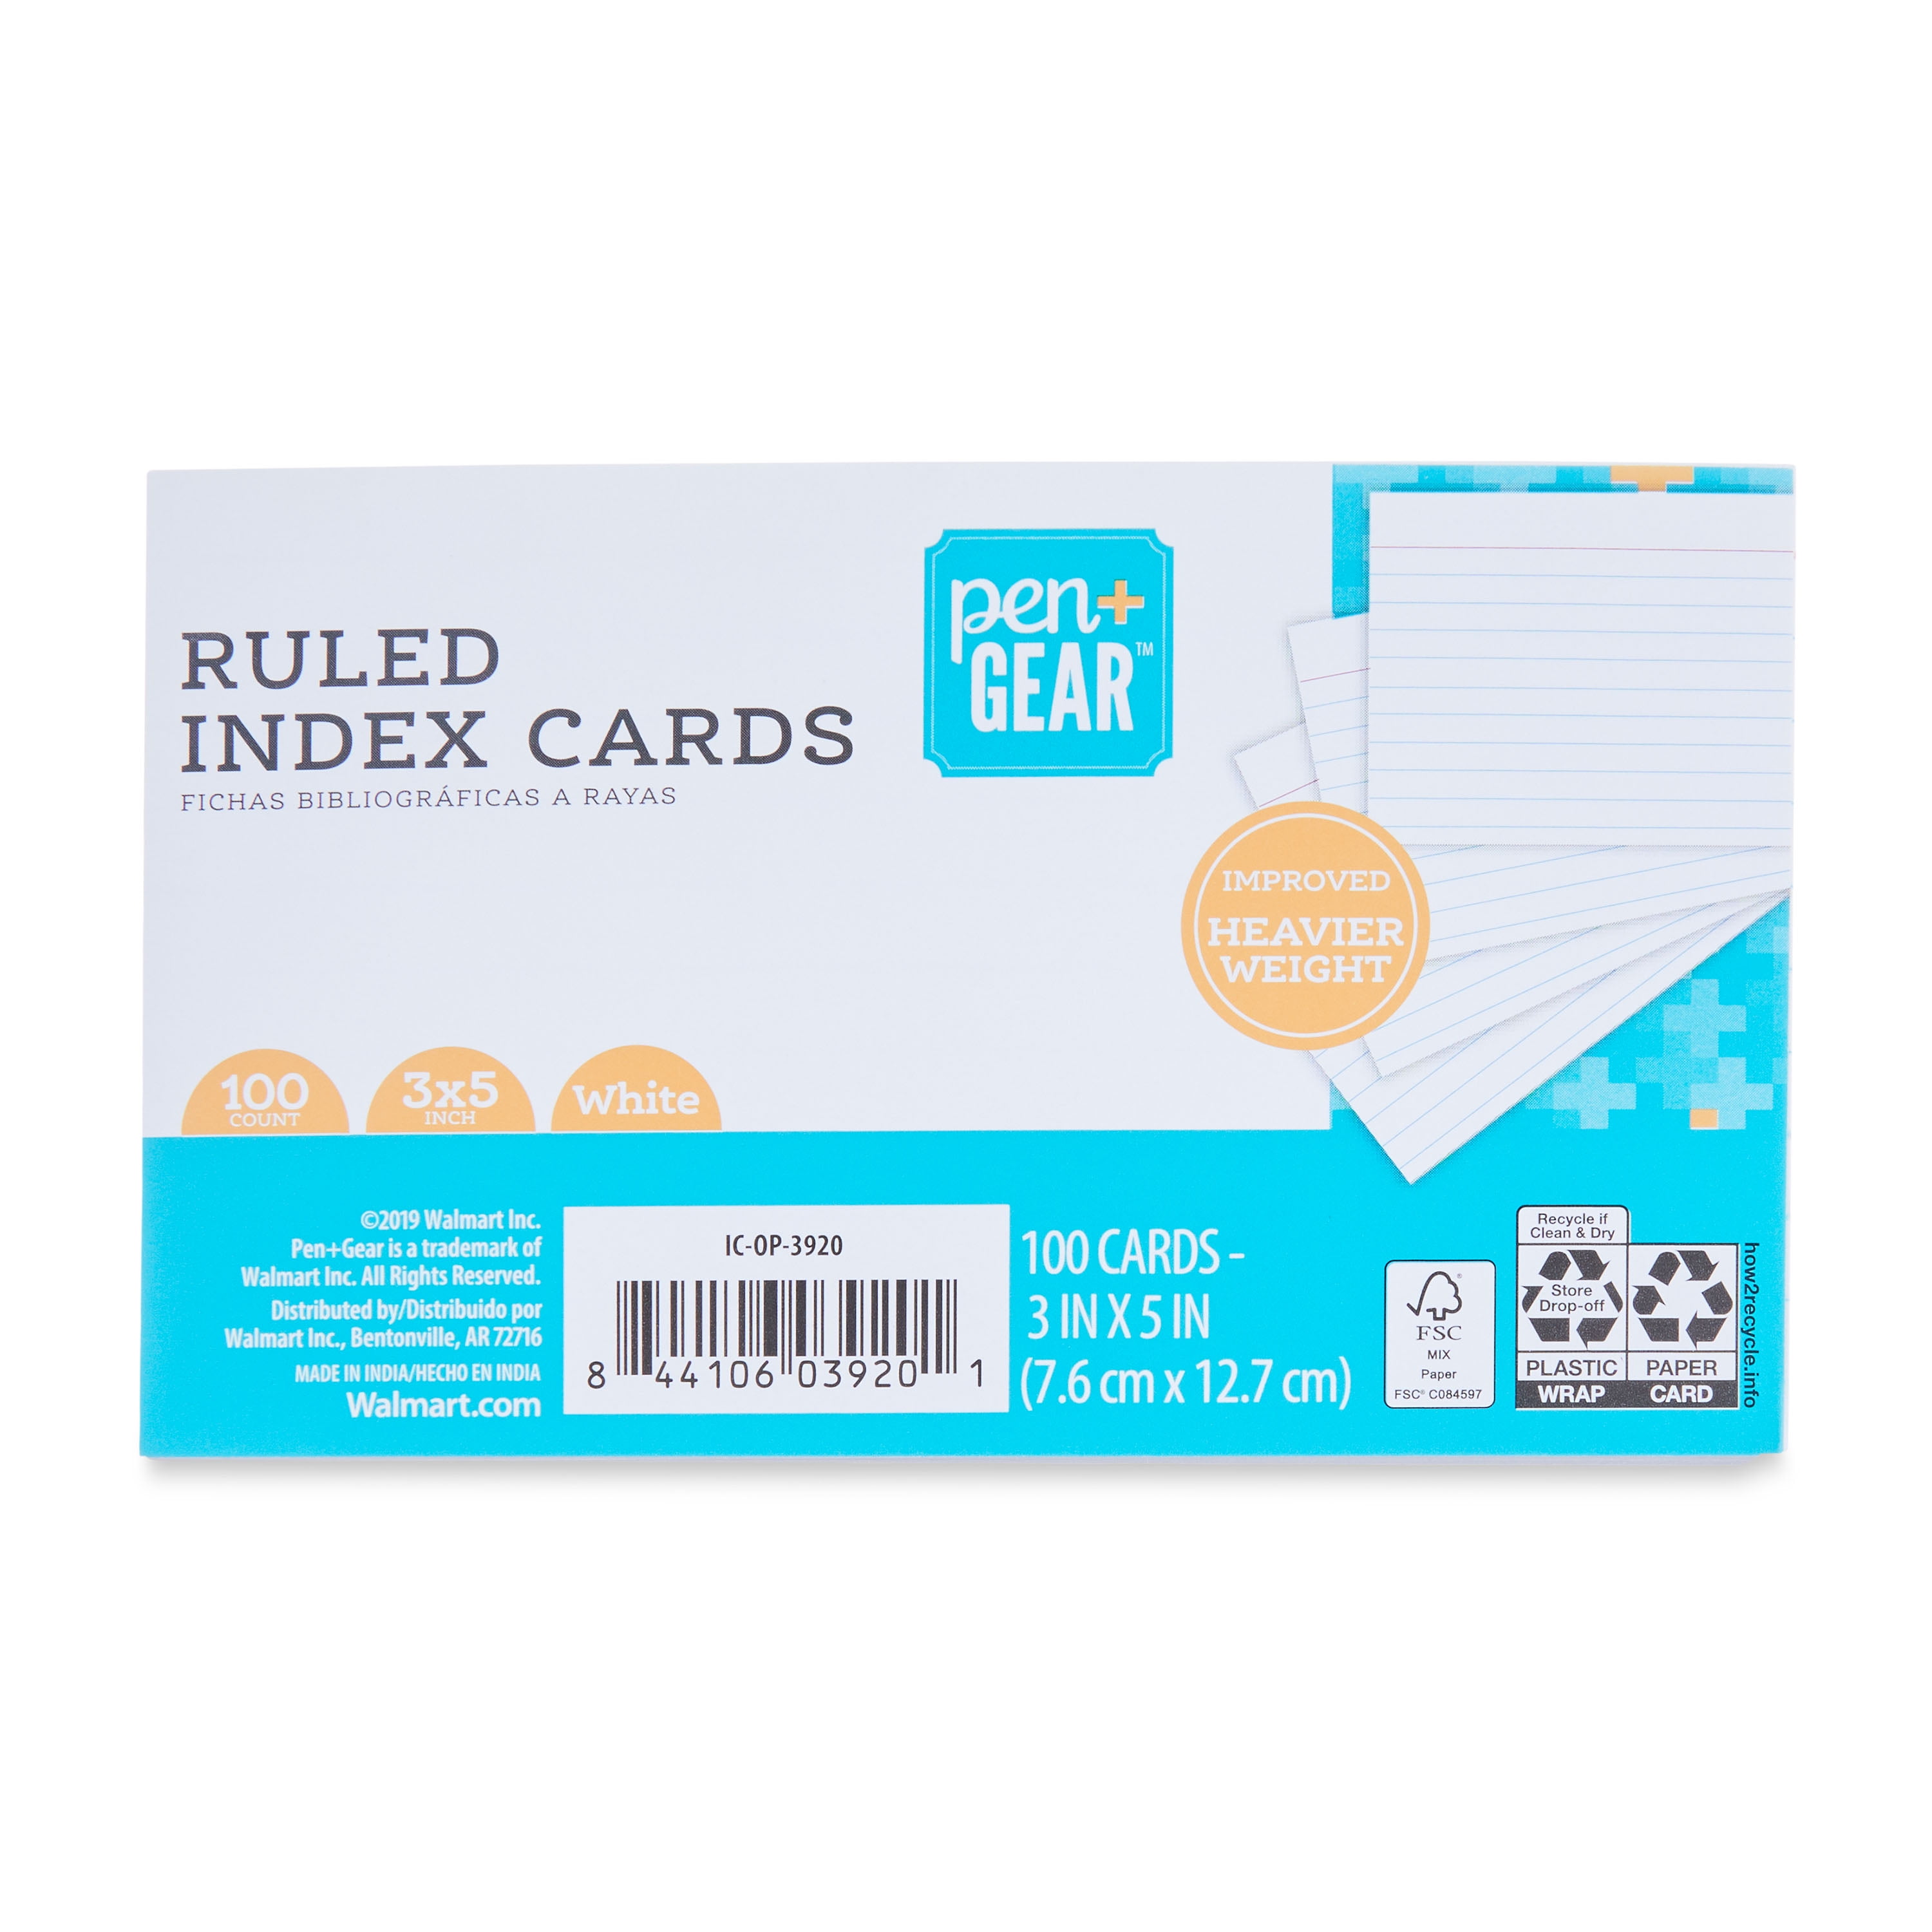 Pen + Gear Ruled Index Cards, Neon Assorted Colors, 300 Count, 3 x 5